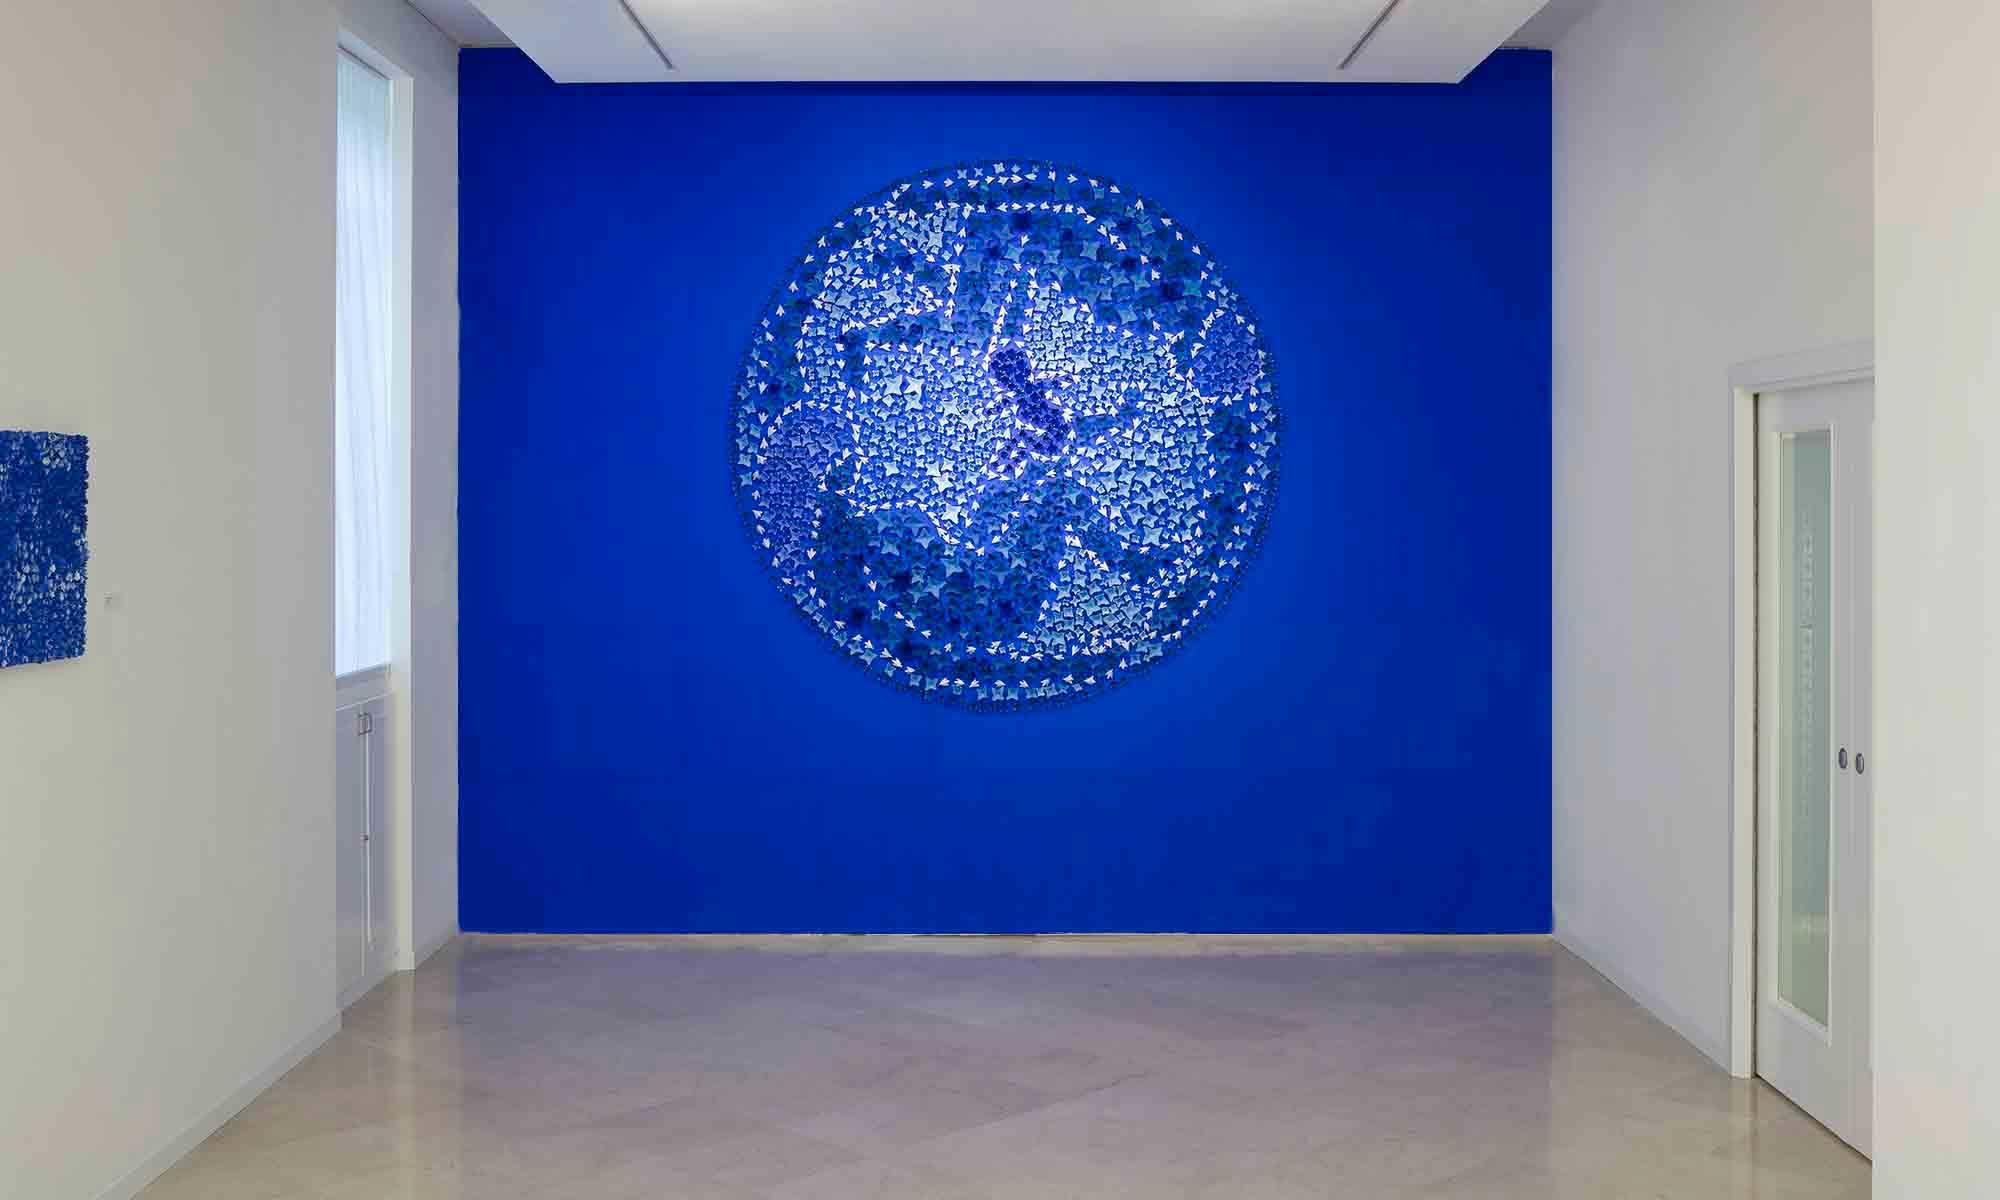 exhibitions of gallery l’incontro Installation by Kazumasa Mizokami 2010 The deep inner wall is deep blue in color. In addition, a large number of small blue and white terracotta flowers are applied and fixed the shapes of men and women in a round shape, in the center a small child, one sees a large installation of earth. 